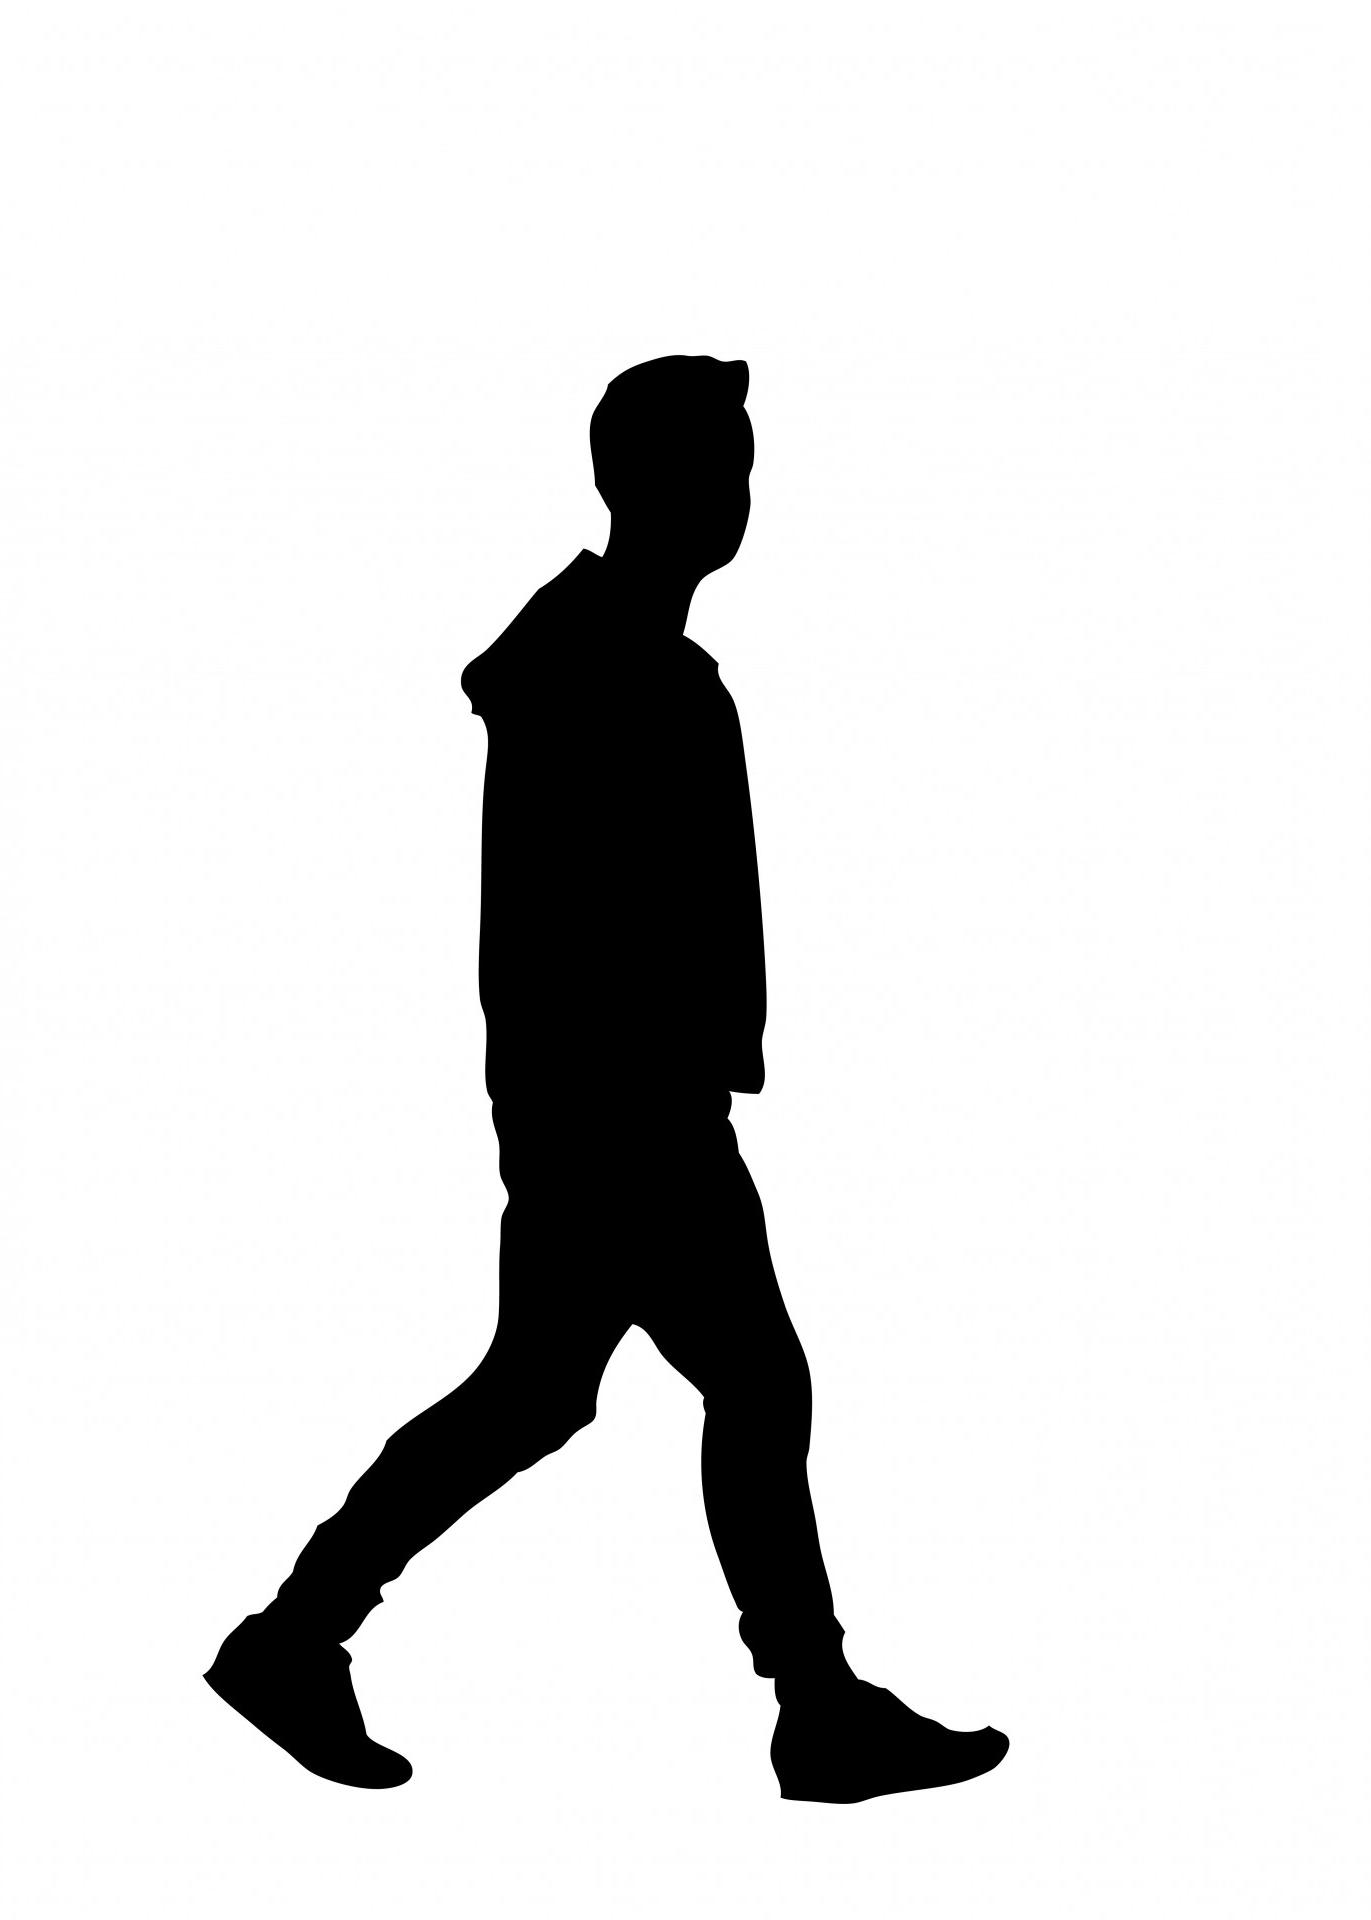 Human Silhouette Clipart | Free download on ClipArtMag
 Silhouette Man Walking Tunnel